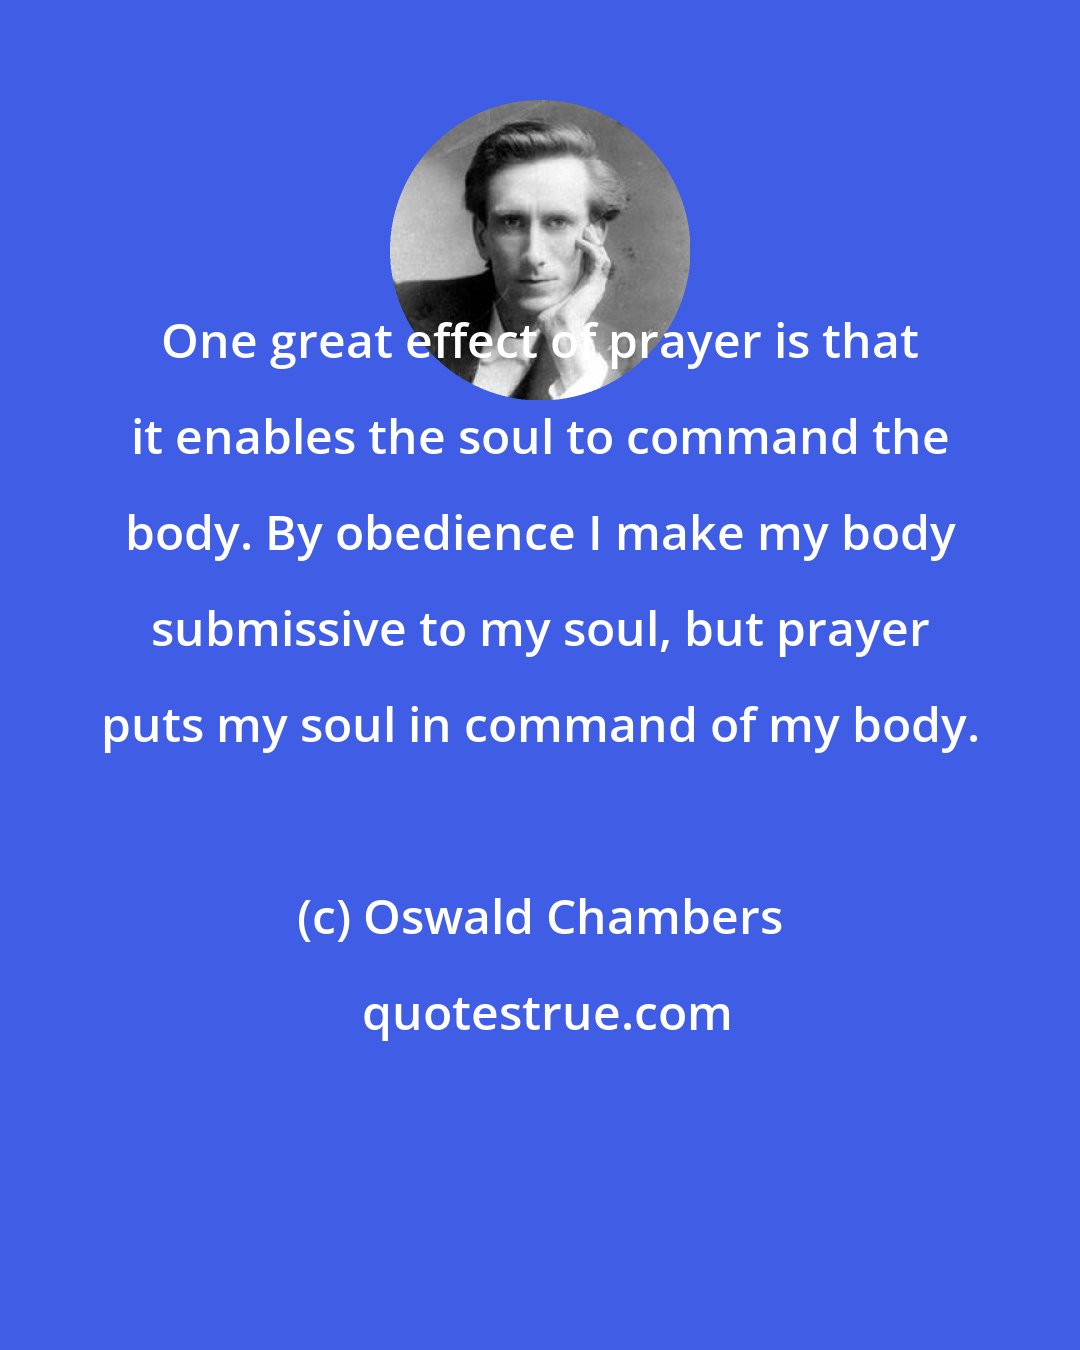 Oswald Chambers: One great effect of prayer is that it enables the soul to command the body. By obedience I make my body submissive to my soul, but prayer puts my soul in command of my body.